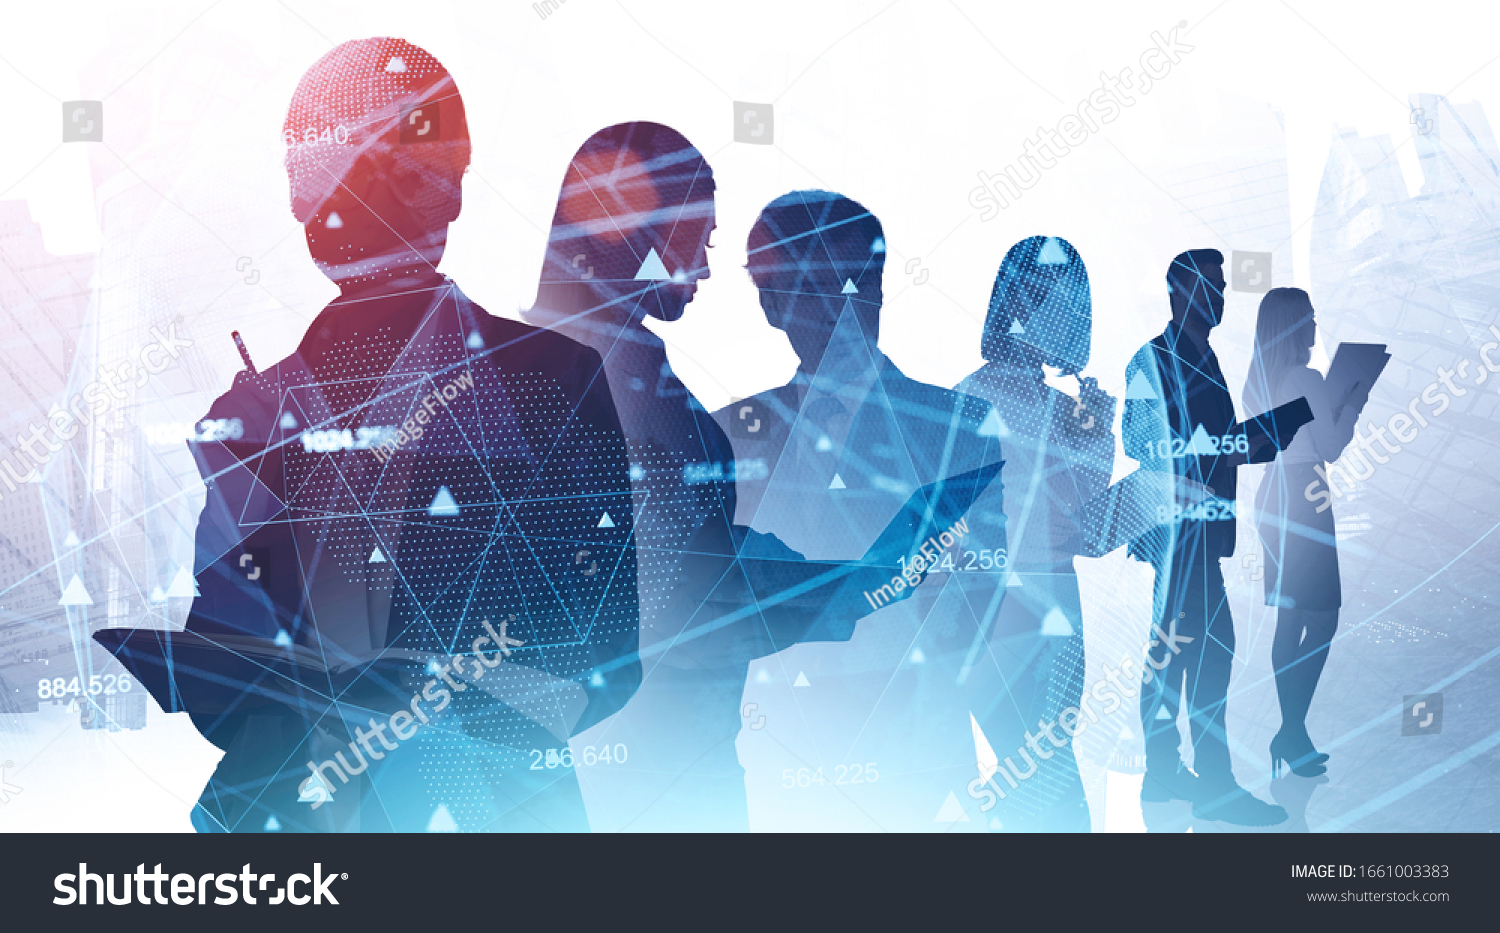 Network and internet communication concept. Silhouettes of business people in abstract city with double exposure of blurry network interface. Toned image #1661003383